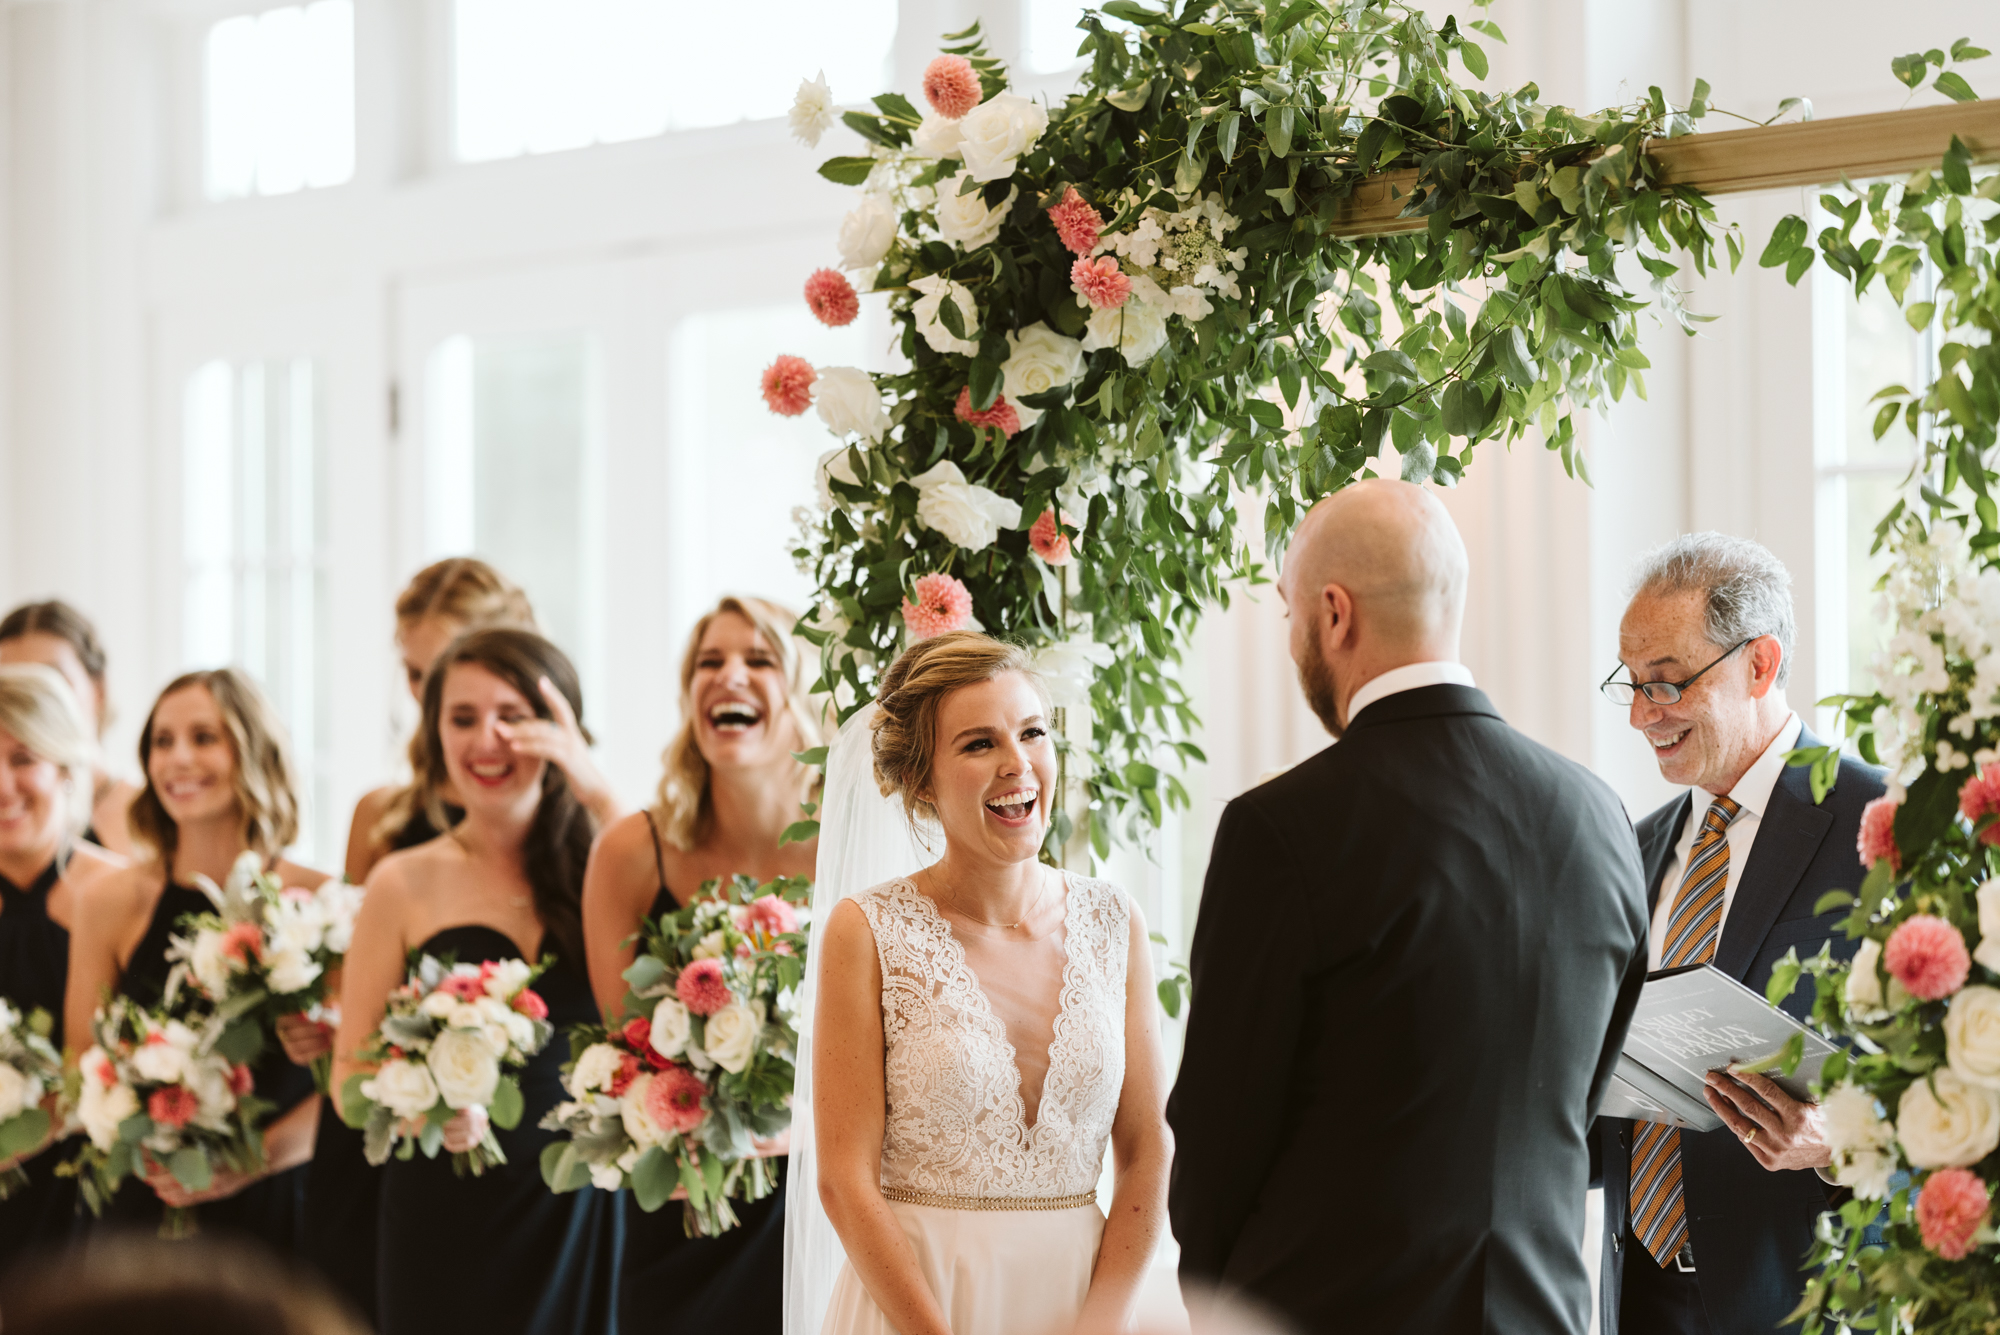 Elegant, Columbia Country Club, Chevy Chase Maryland, Baltimore Wedding Photographer, Classic, Traditional, Ceremony Photo, Meg Owen Floral Designs, Floral Archway, Exchanging Vows and Laughing